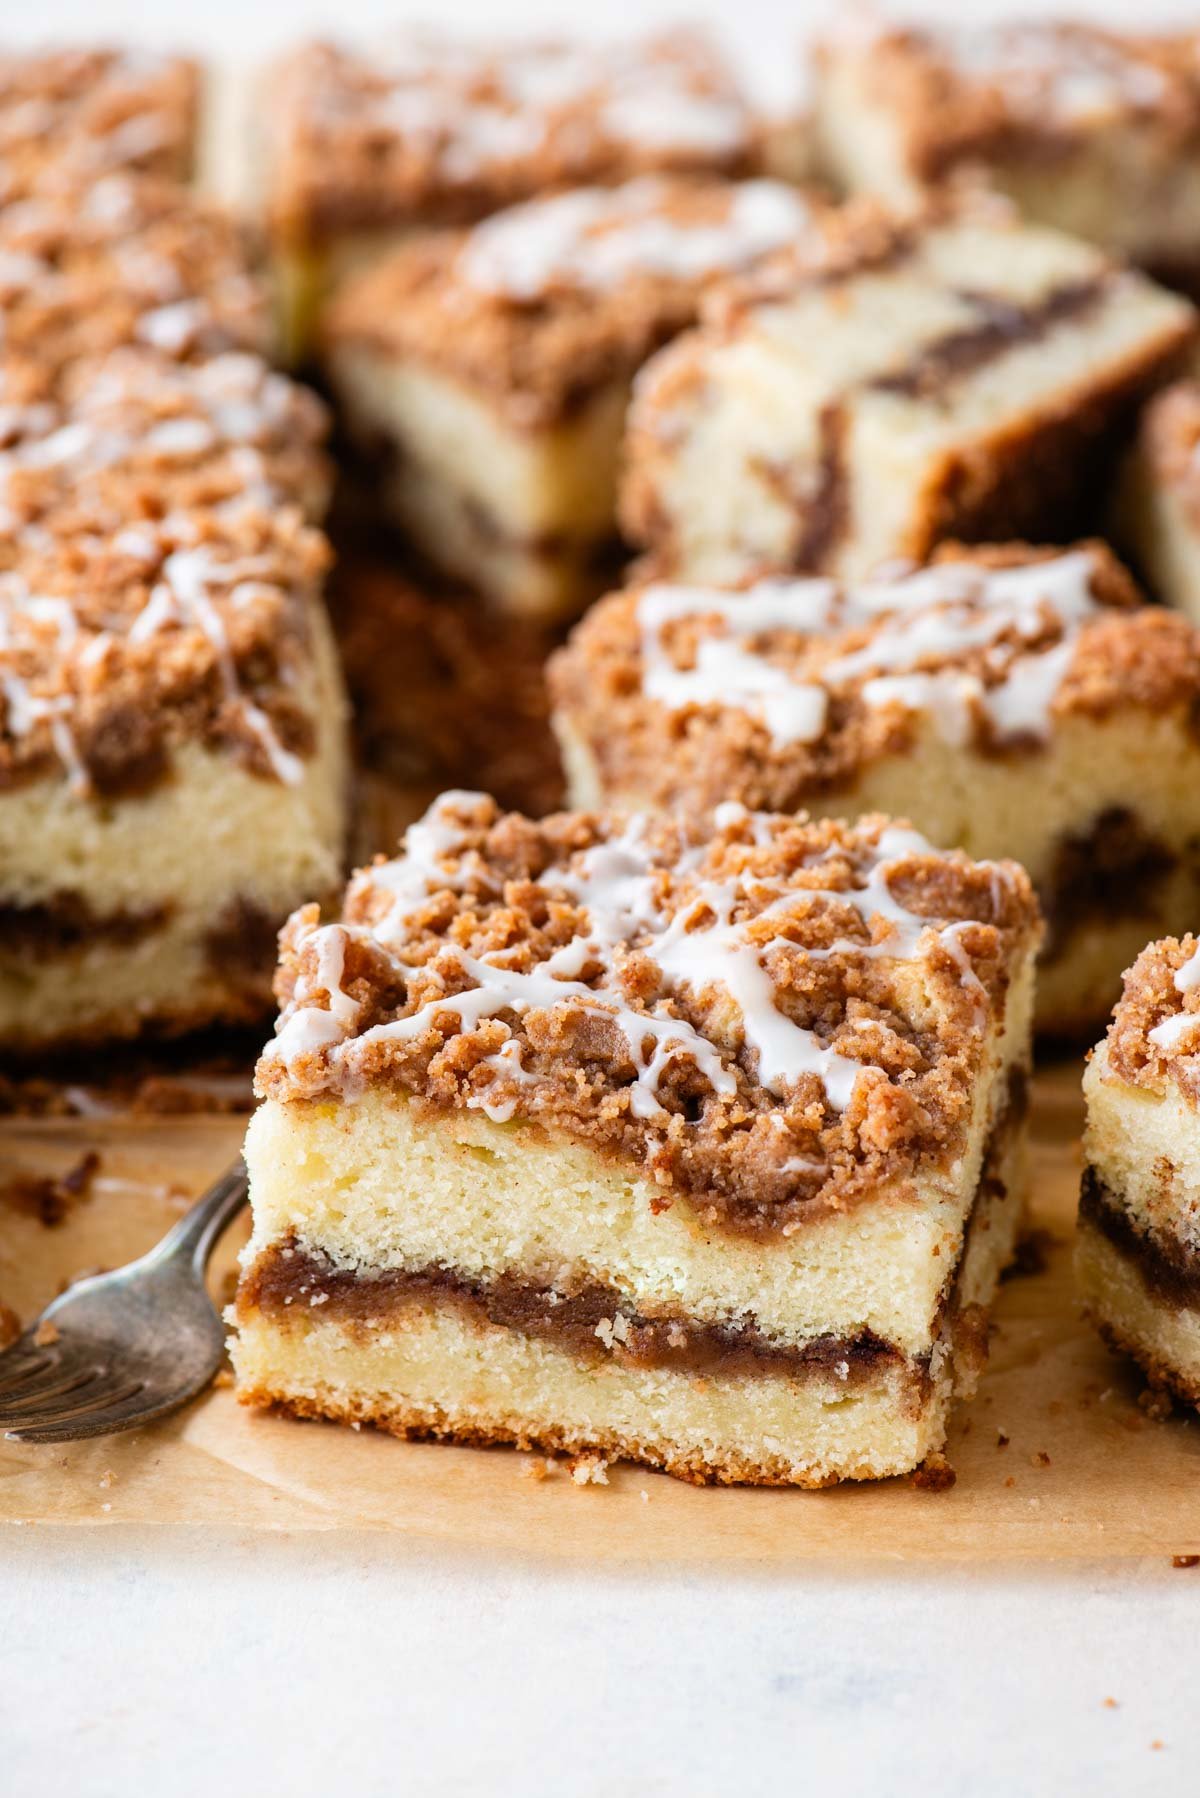 slices of coffee cake arrange on brown paper with a fork in the middle